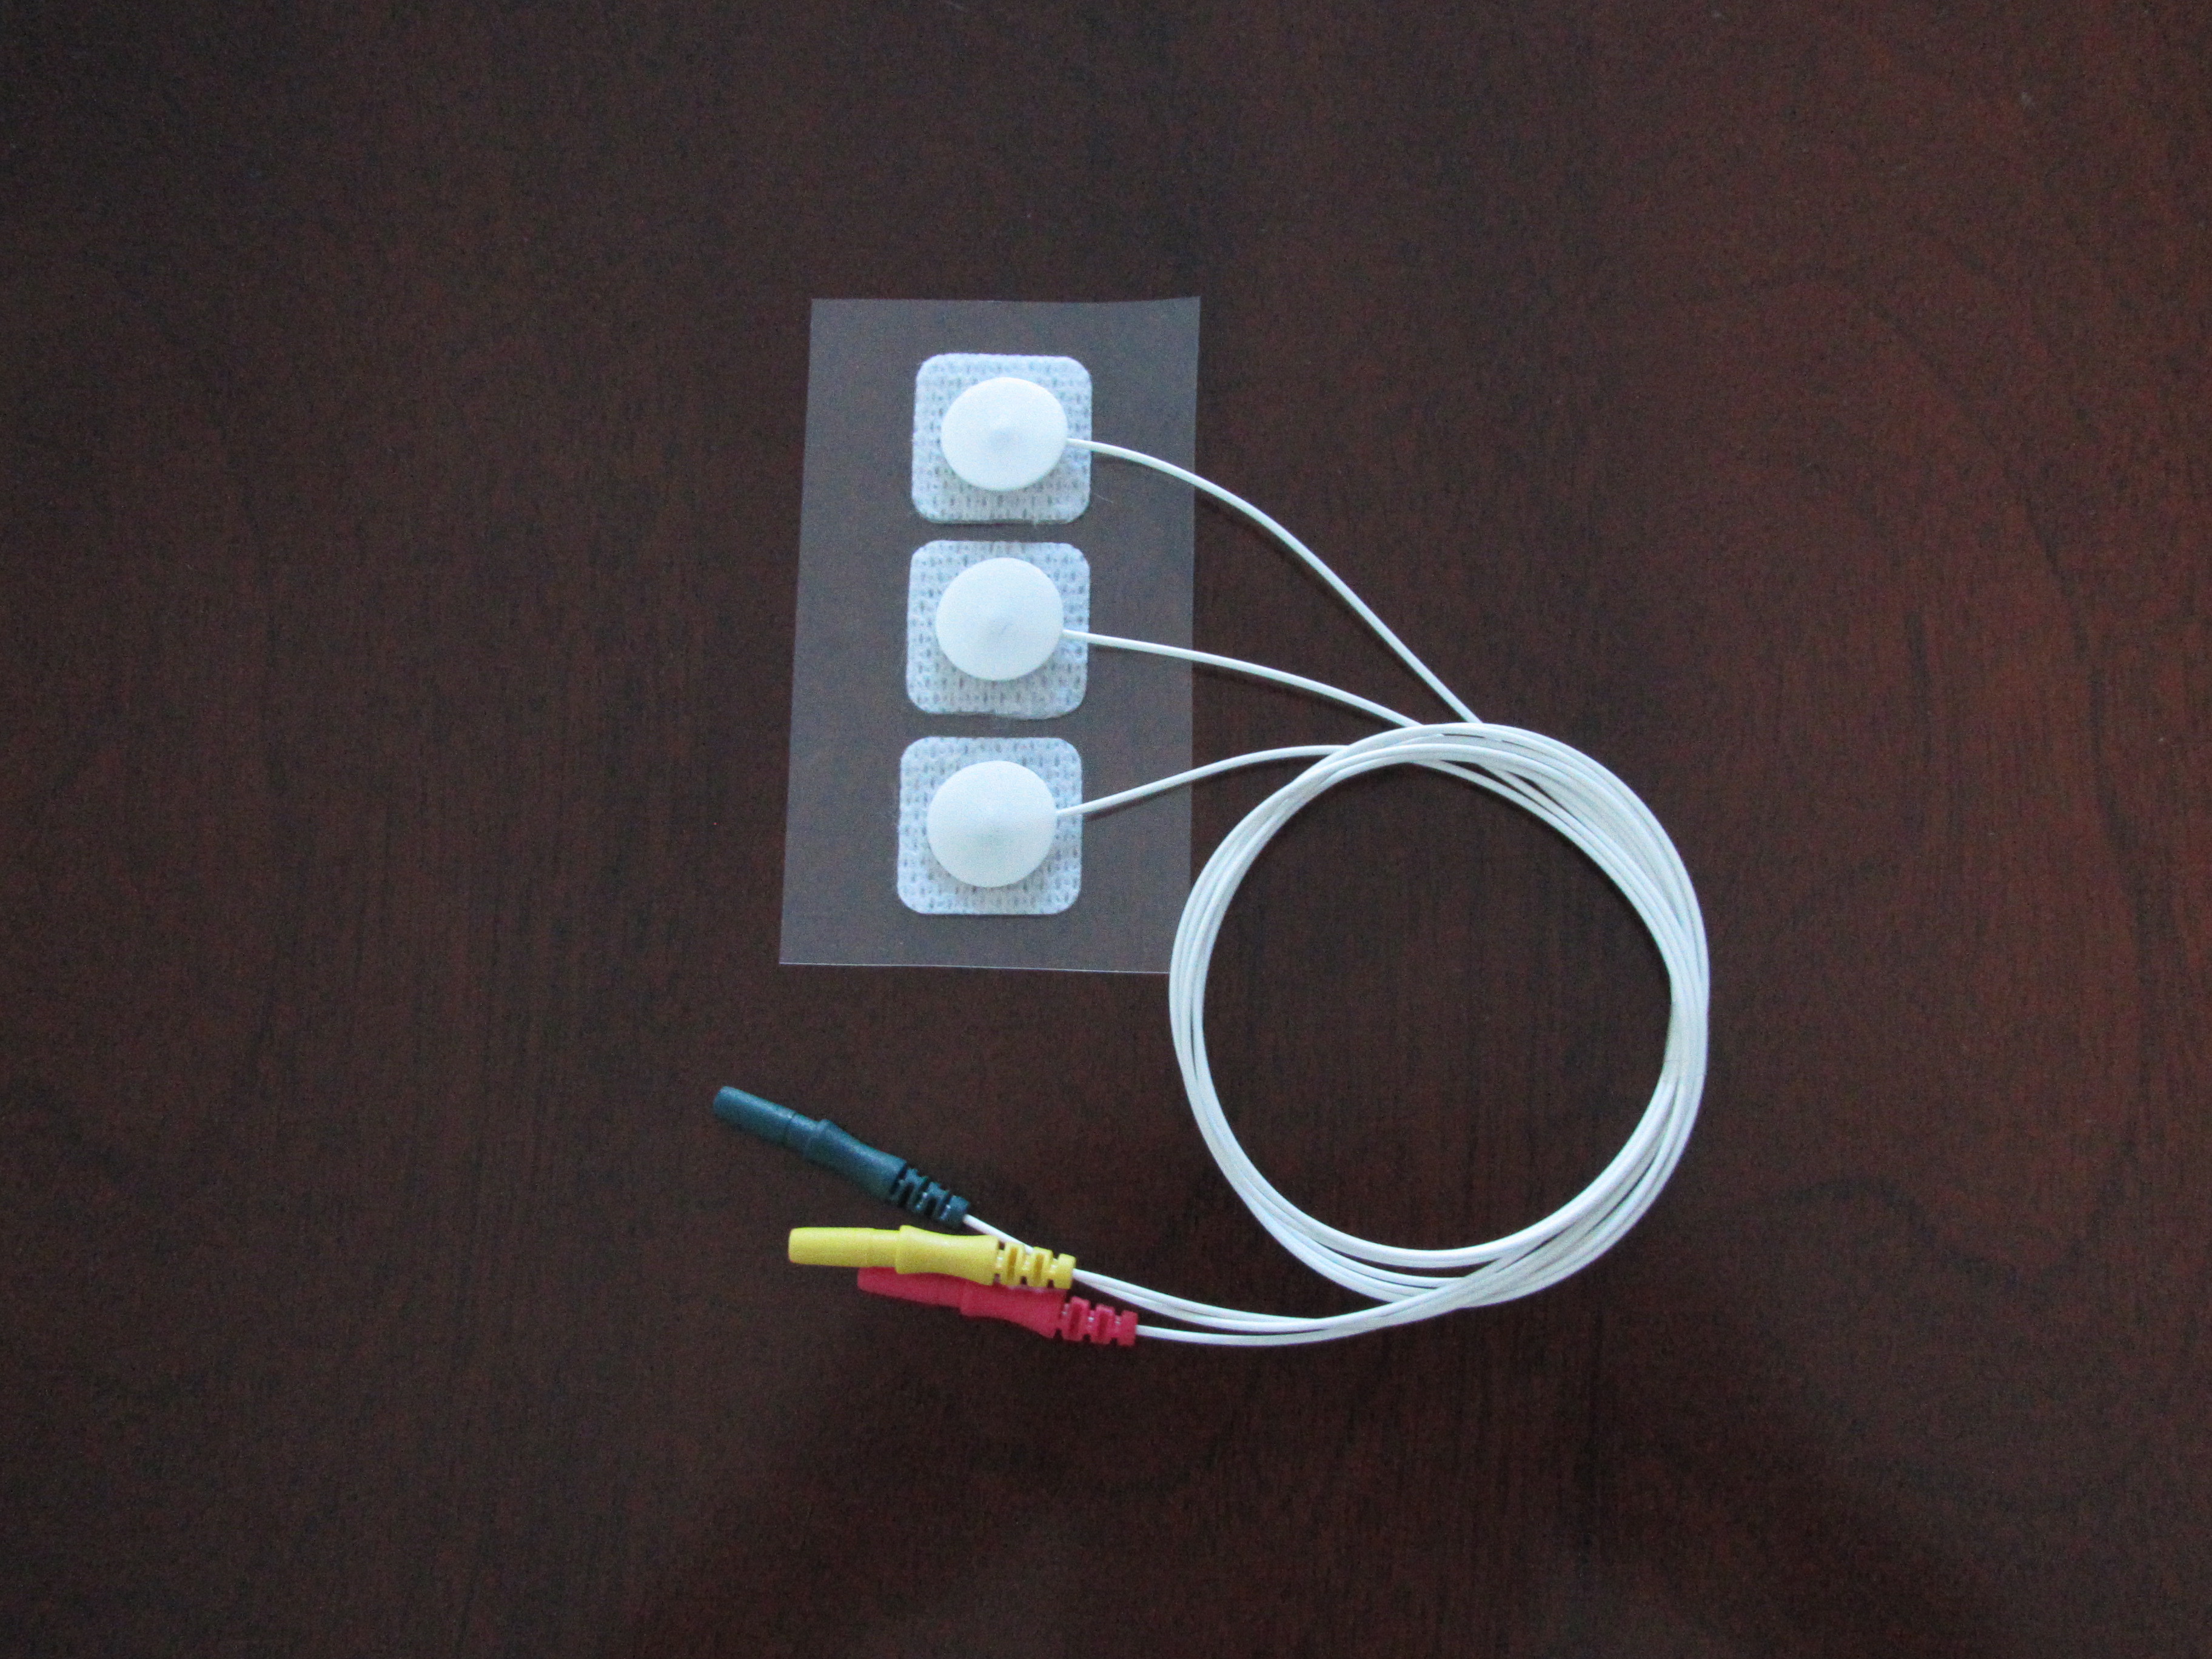 Buy disposable AG/AGCL soft cloth adhesive neonatal /Pediatric ecg electrodes at wholesale prices